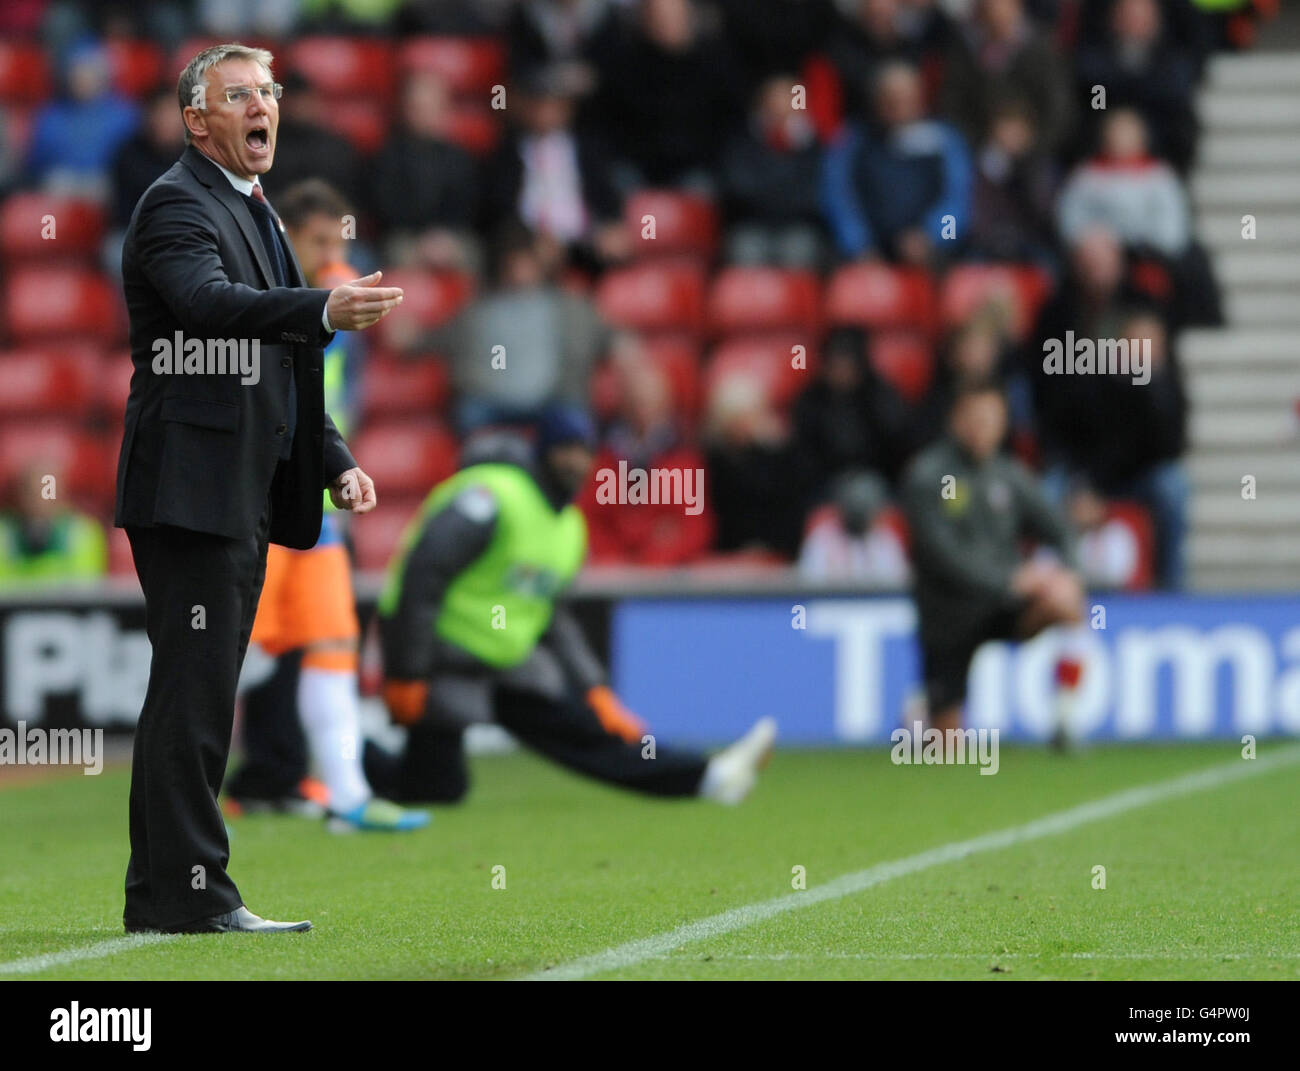 Southampton's manager Nigel Adkins on the touchline during the npower Football League Championship match at St Mary's, Southampton. Stock Photo